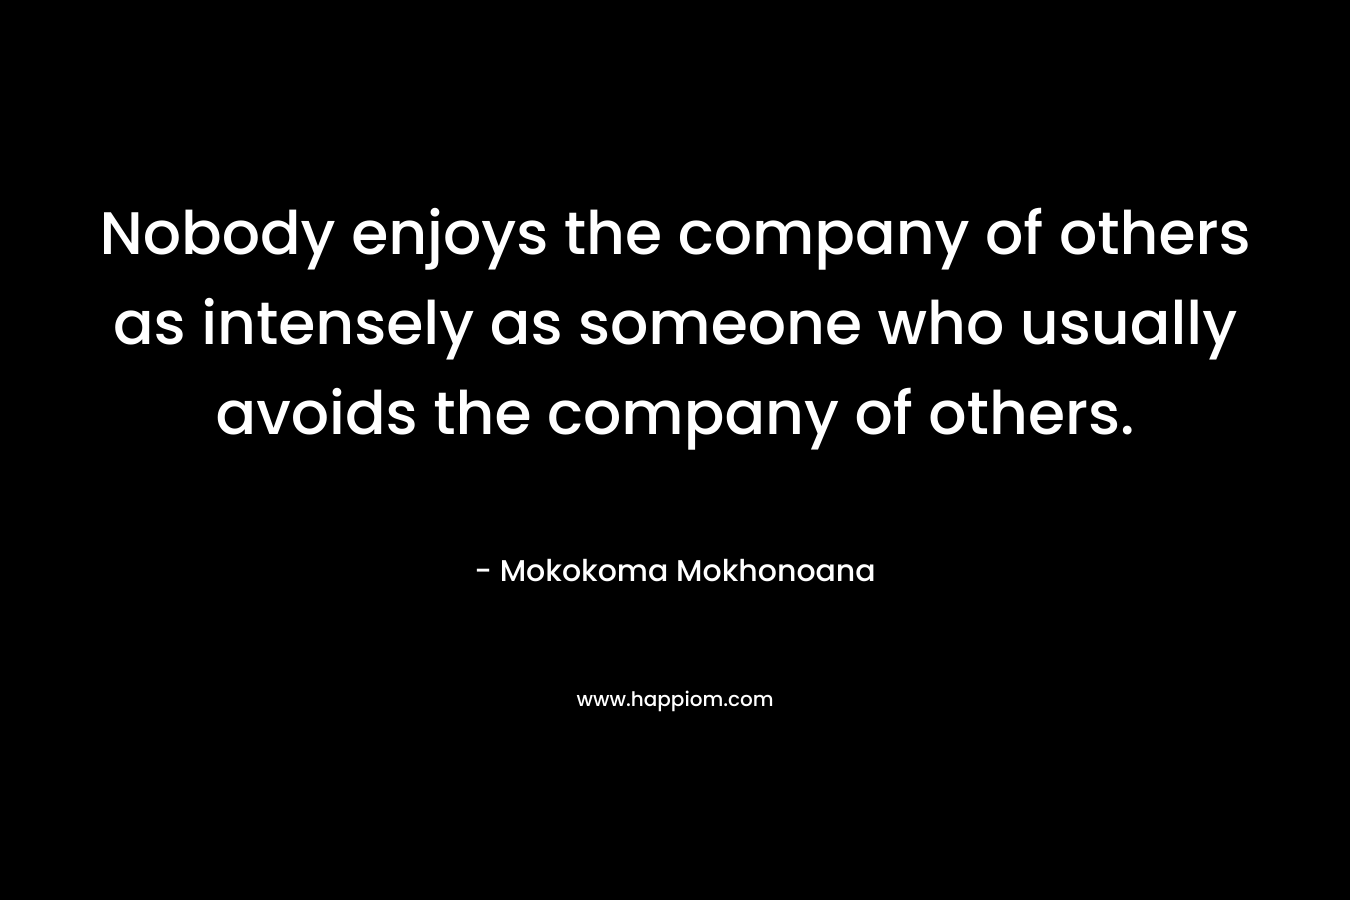 Nobody enjoys the company of others as intensely as someone who usually avoids the company of others.